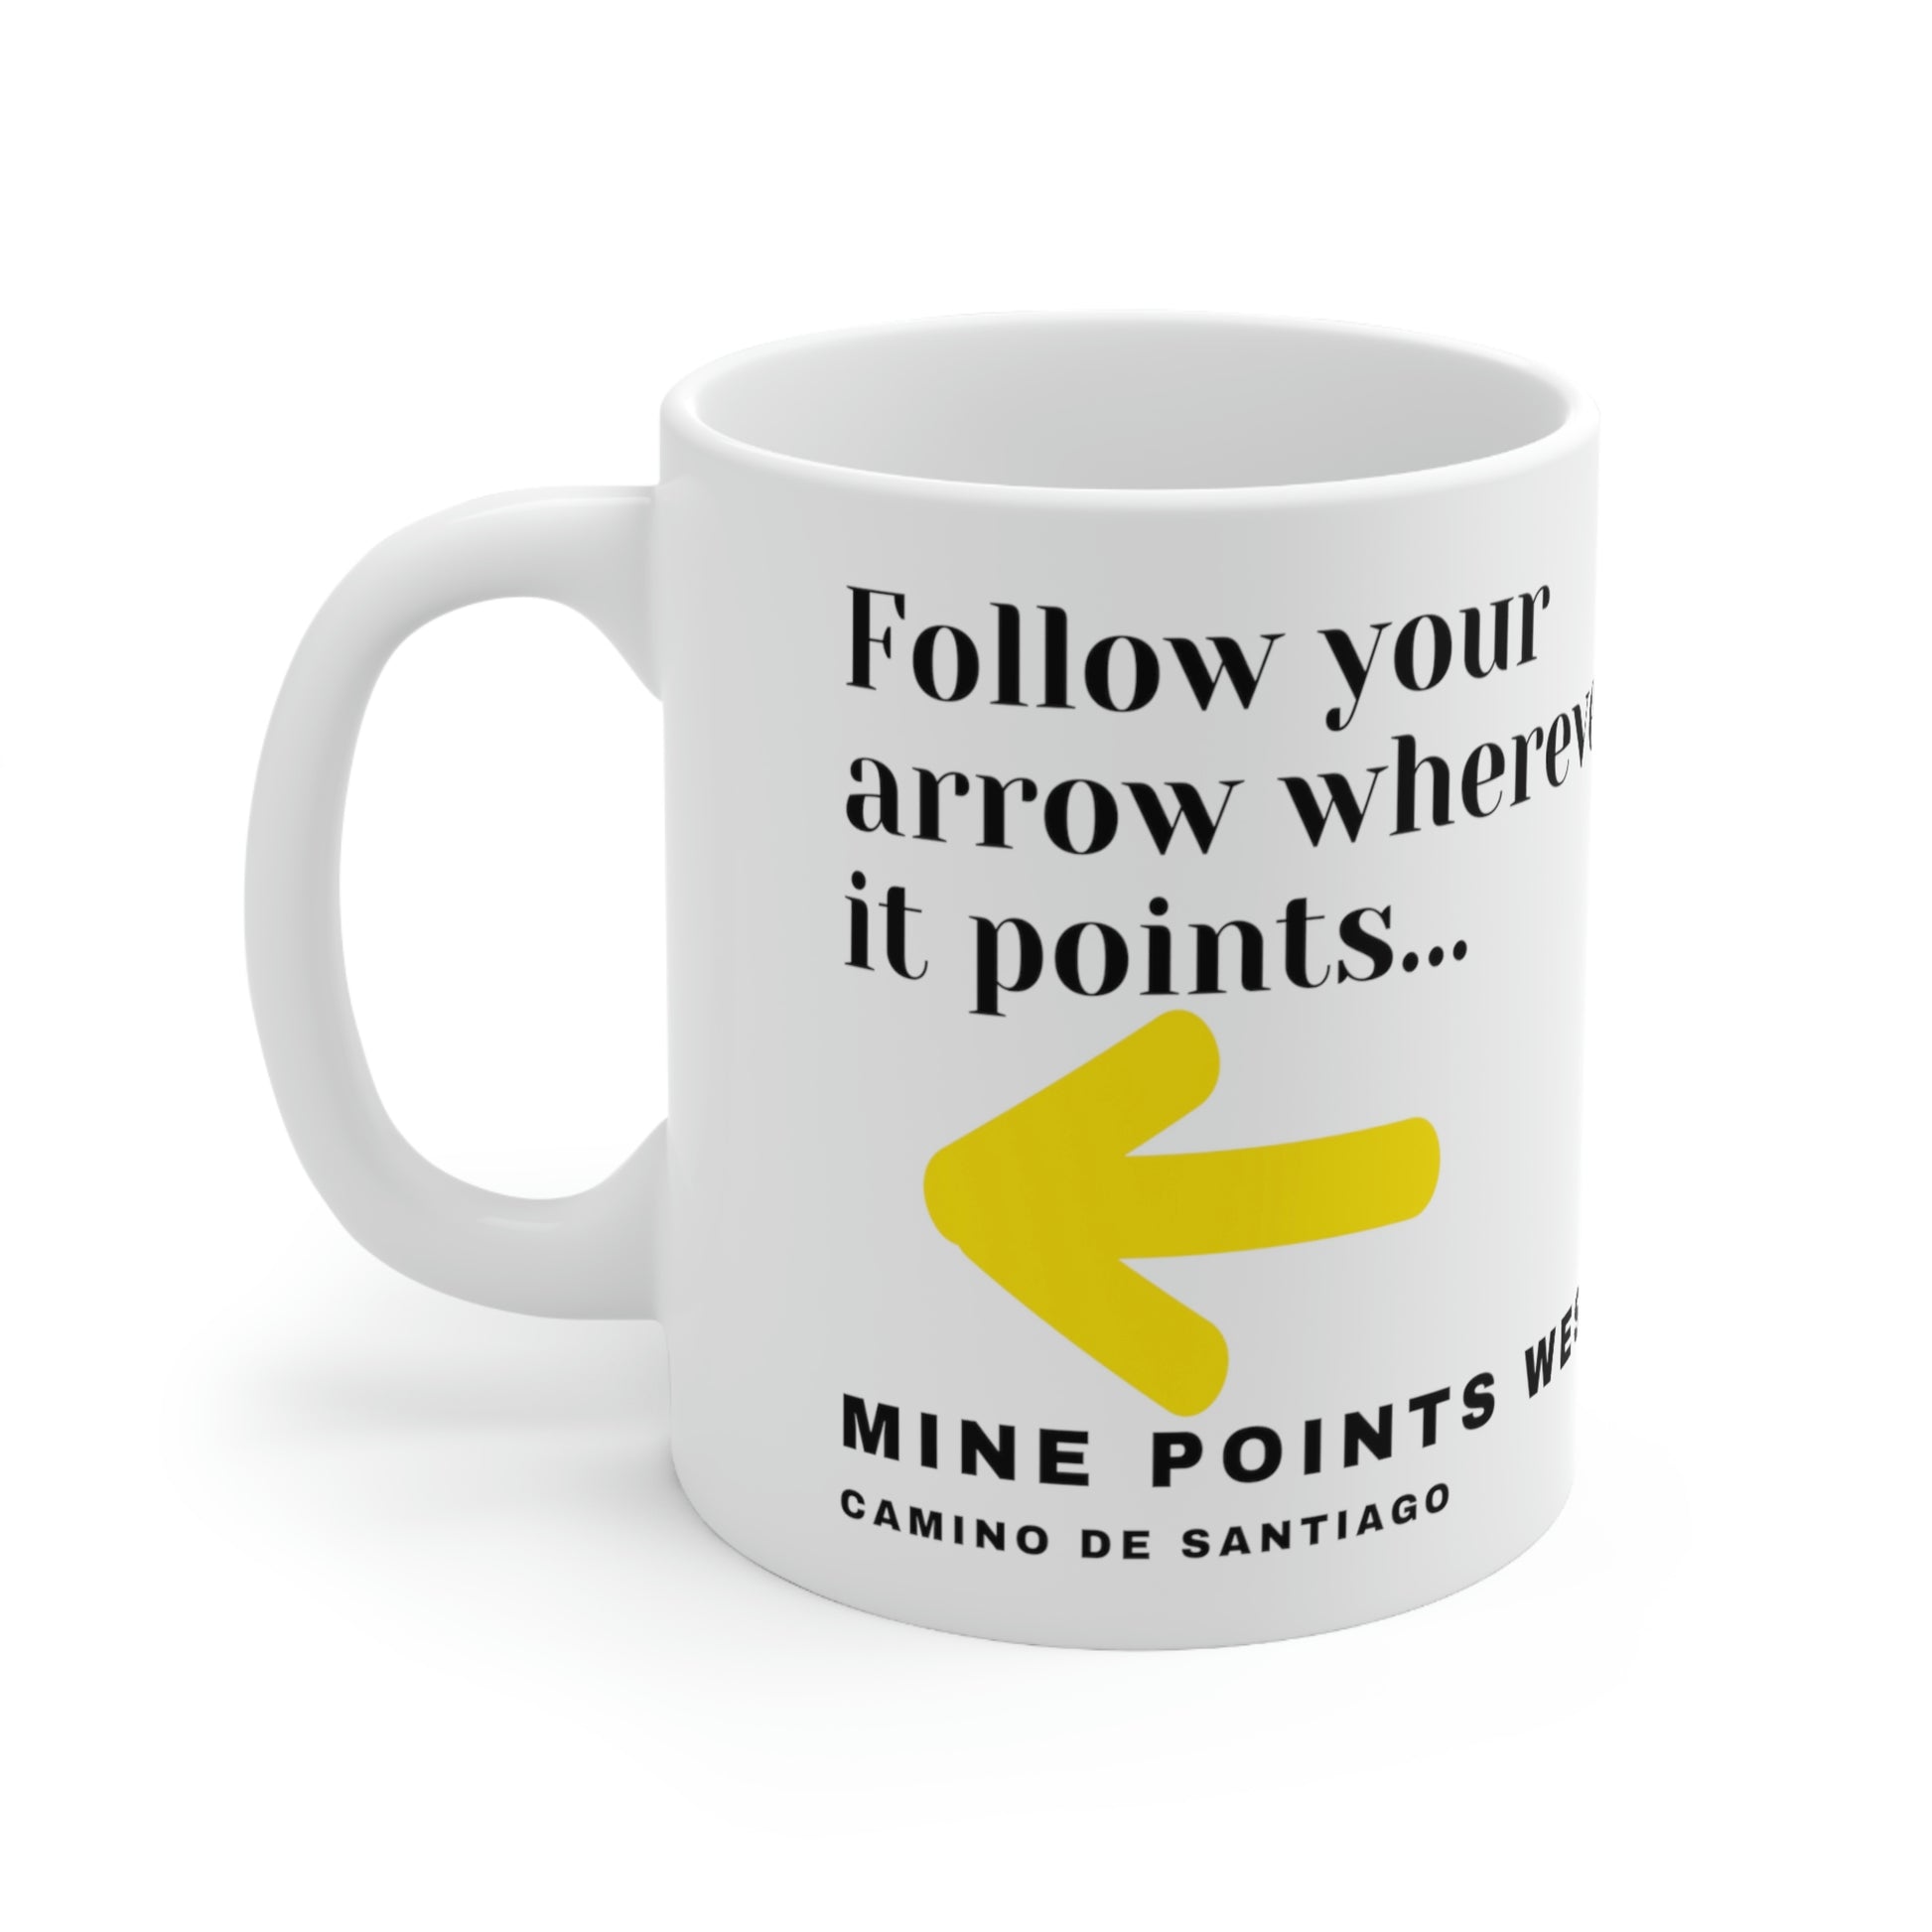 Camino Frances - This white ceramic mug has a slogan in clack letters that says, Follow your arrow wherever it points . . . With a yellow arrow below it then below that the words, Mine Points West and under that Camino de Santiago. The Mug is surrounded by white background.